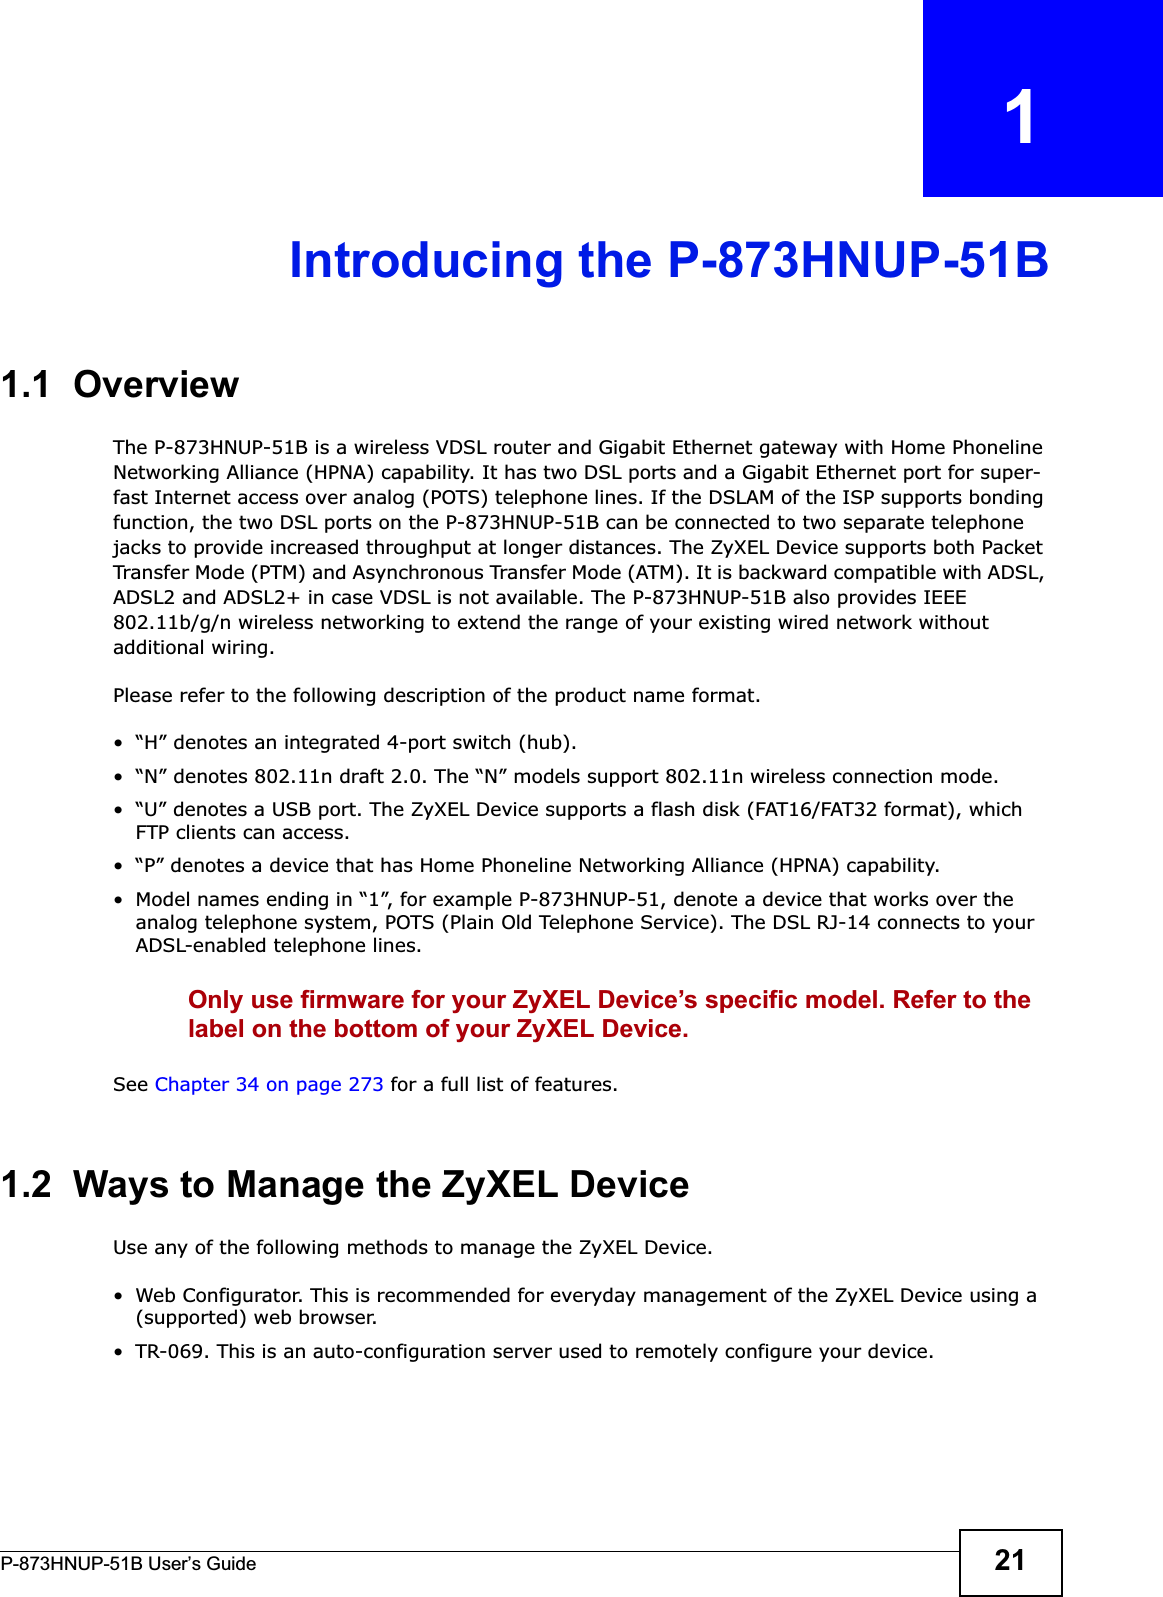 P-873HNUP-51B User’s Guide 21CHAPTER   1Introducing the P-873HNUP-51B1.1  OverviewThe P-873HNUP-51B is a wireless VDSL router and Gigabit Ethernet gateway with Home Phoneline Networking Alliance (HPNA) capability. It has two DSL ports and a Gigabit Ethernet port for super-fast Internet access over analog (POTS) telephone lines. If the DSLAM of the ISP supports bonding function, the two DSL ports on the P-873HNUP-51B can be connected to two separate telephone jacks to provide increased throughput at longer distances. The ZyXEL Device supports both Packet Transfer Mode (PTM) and Asynchronous Transfer Mode (ATM). It is backward compatible with ADSL, ADSL2 and ADSL2+ in case VDSL is not available. The P-873HNUP-51B also provides IEEE 802.11b/g/n wireless networking to extend the range of your existing wired network without additional wiring.Please refer to the following description of the product name format.• “H” denotes an integrated 4-port switch (hub). • “N” denotes 802.11n draft 2.0. The “N” models support 802.11n wireless connection mode.• “U” denotes a USB port. The ZyXEL Device supports a flash disk (FAT16/FAT32 format), which FTP clients can access.• “P” denotes a device that has Home Phoneline Networking Alliance (HPNA) capability.• Model names ending in “1”, for example P-873HNUP-51, denote a device that works over the analog telephone system, POTS (Plain Old Telephone Service). The DSL RJ-14 connects to your ADSL-enabled telephone lines. Only use firmware for your ZyXEL Device’s specific model. Refer to the label on the bottom of your ZyXEL Device.See Chapter 34 on page 273 for a full list of features.1.2  Ways to Manage the ZyXEL DeviceUse any of the following methods to manage the ZyXEL Device.• Web Configurator. This is recommended for everyday management of the ZyXEL Device using a (supported) web browser.• TR-069. This is an auto-configuration server used to remotely configure your device.